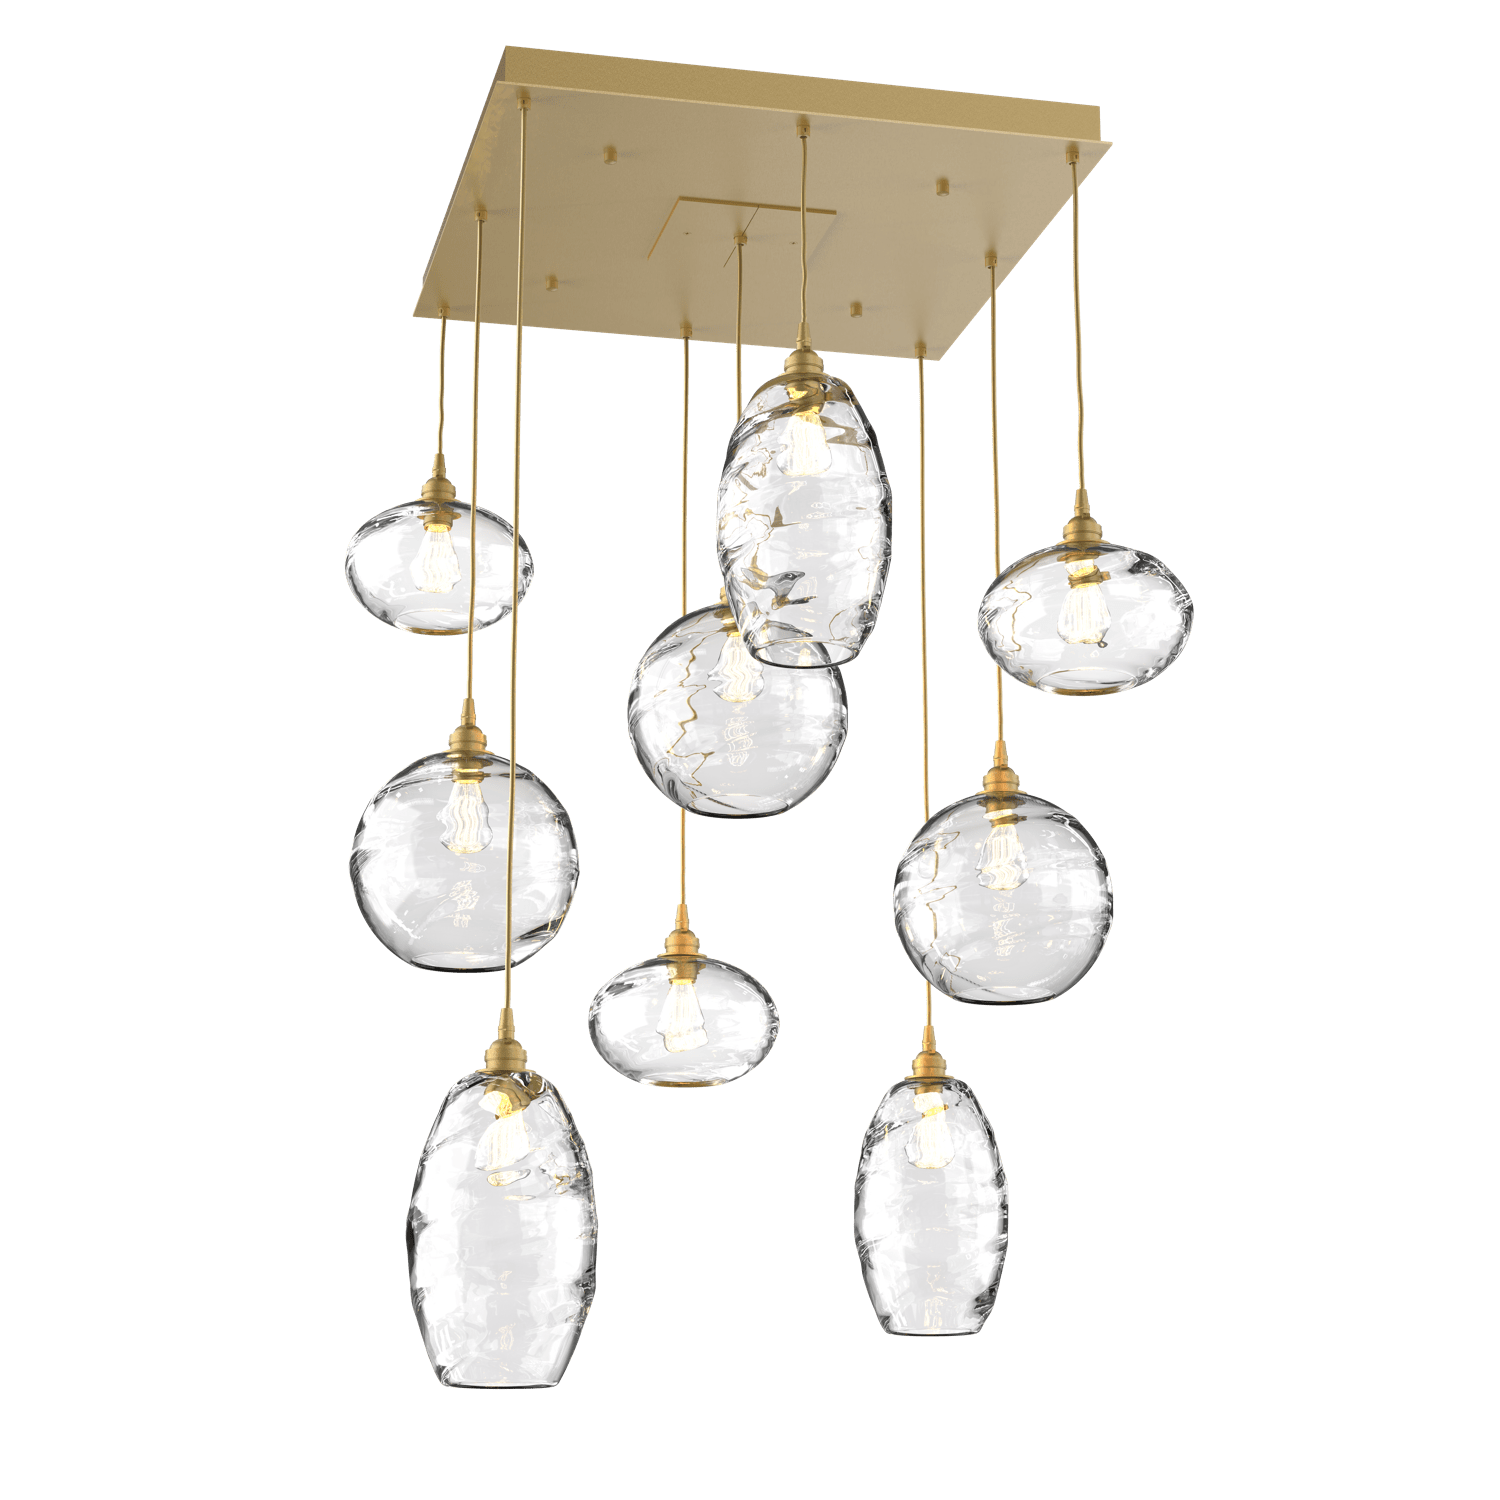 CHB0048-09-GB-OC-Hammerton-Studio-Optic-Blown-Glass-Misto-9-light-square-pendant-chandelier-with-gilded-brass-finish-and-optic-clear-blown-glass-shades-and-incandescent-lamping